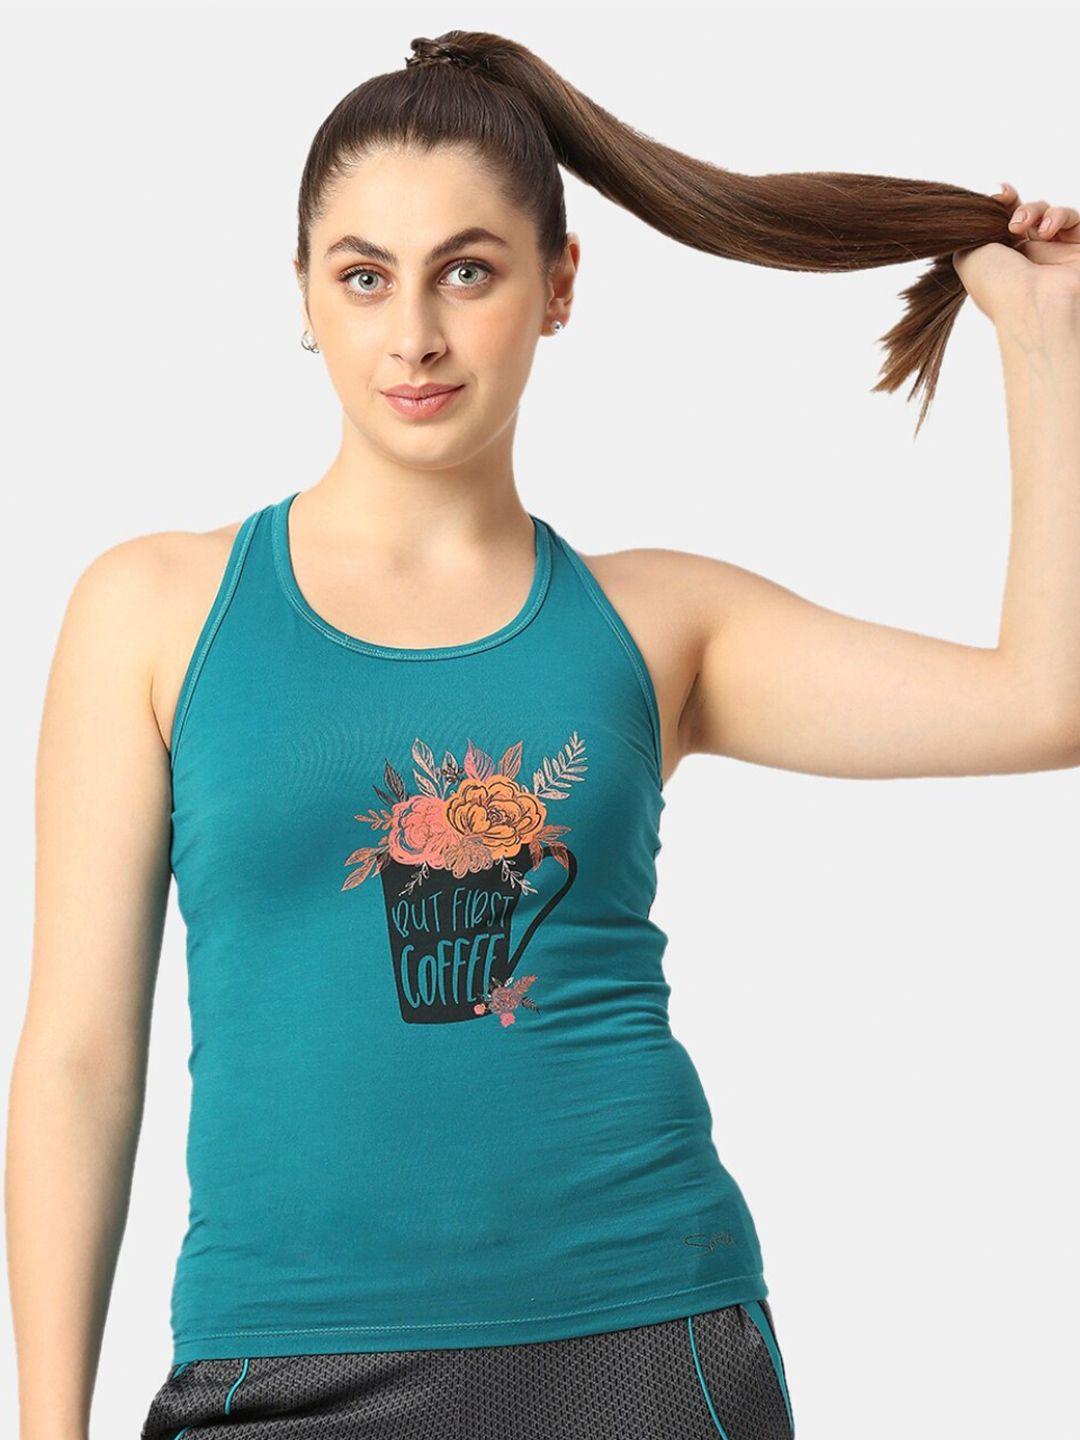 lovable-sport-graphic-printed-tank-top